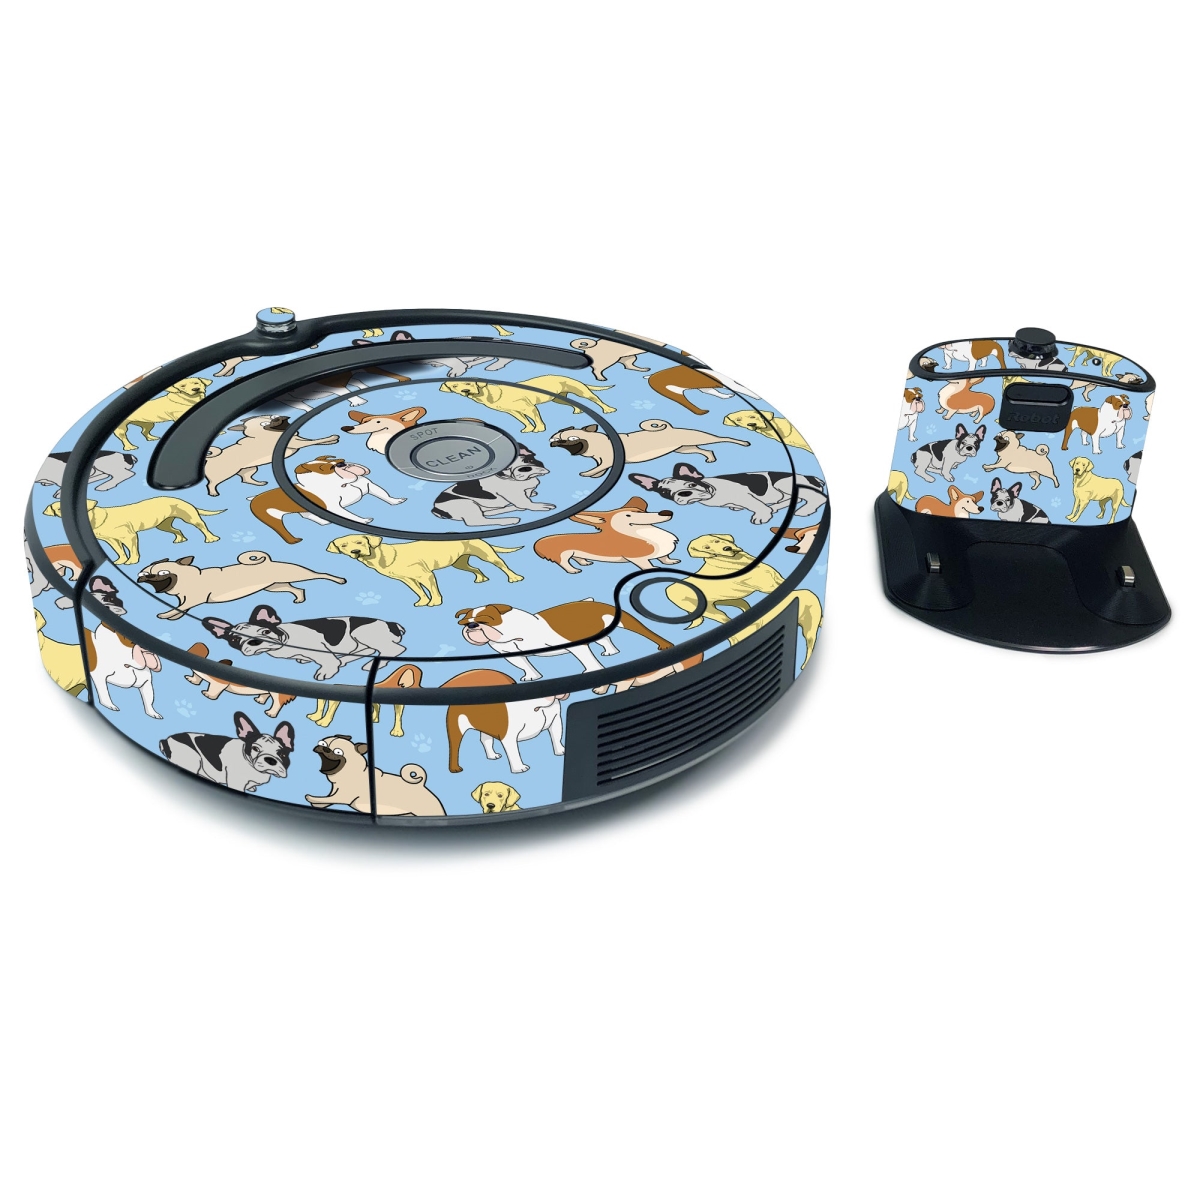 Picture of MightySkins IRRO675-Puppy Party Skin for iRobot Roomba 675 Max Coverage - Puppy Party